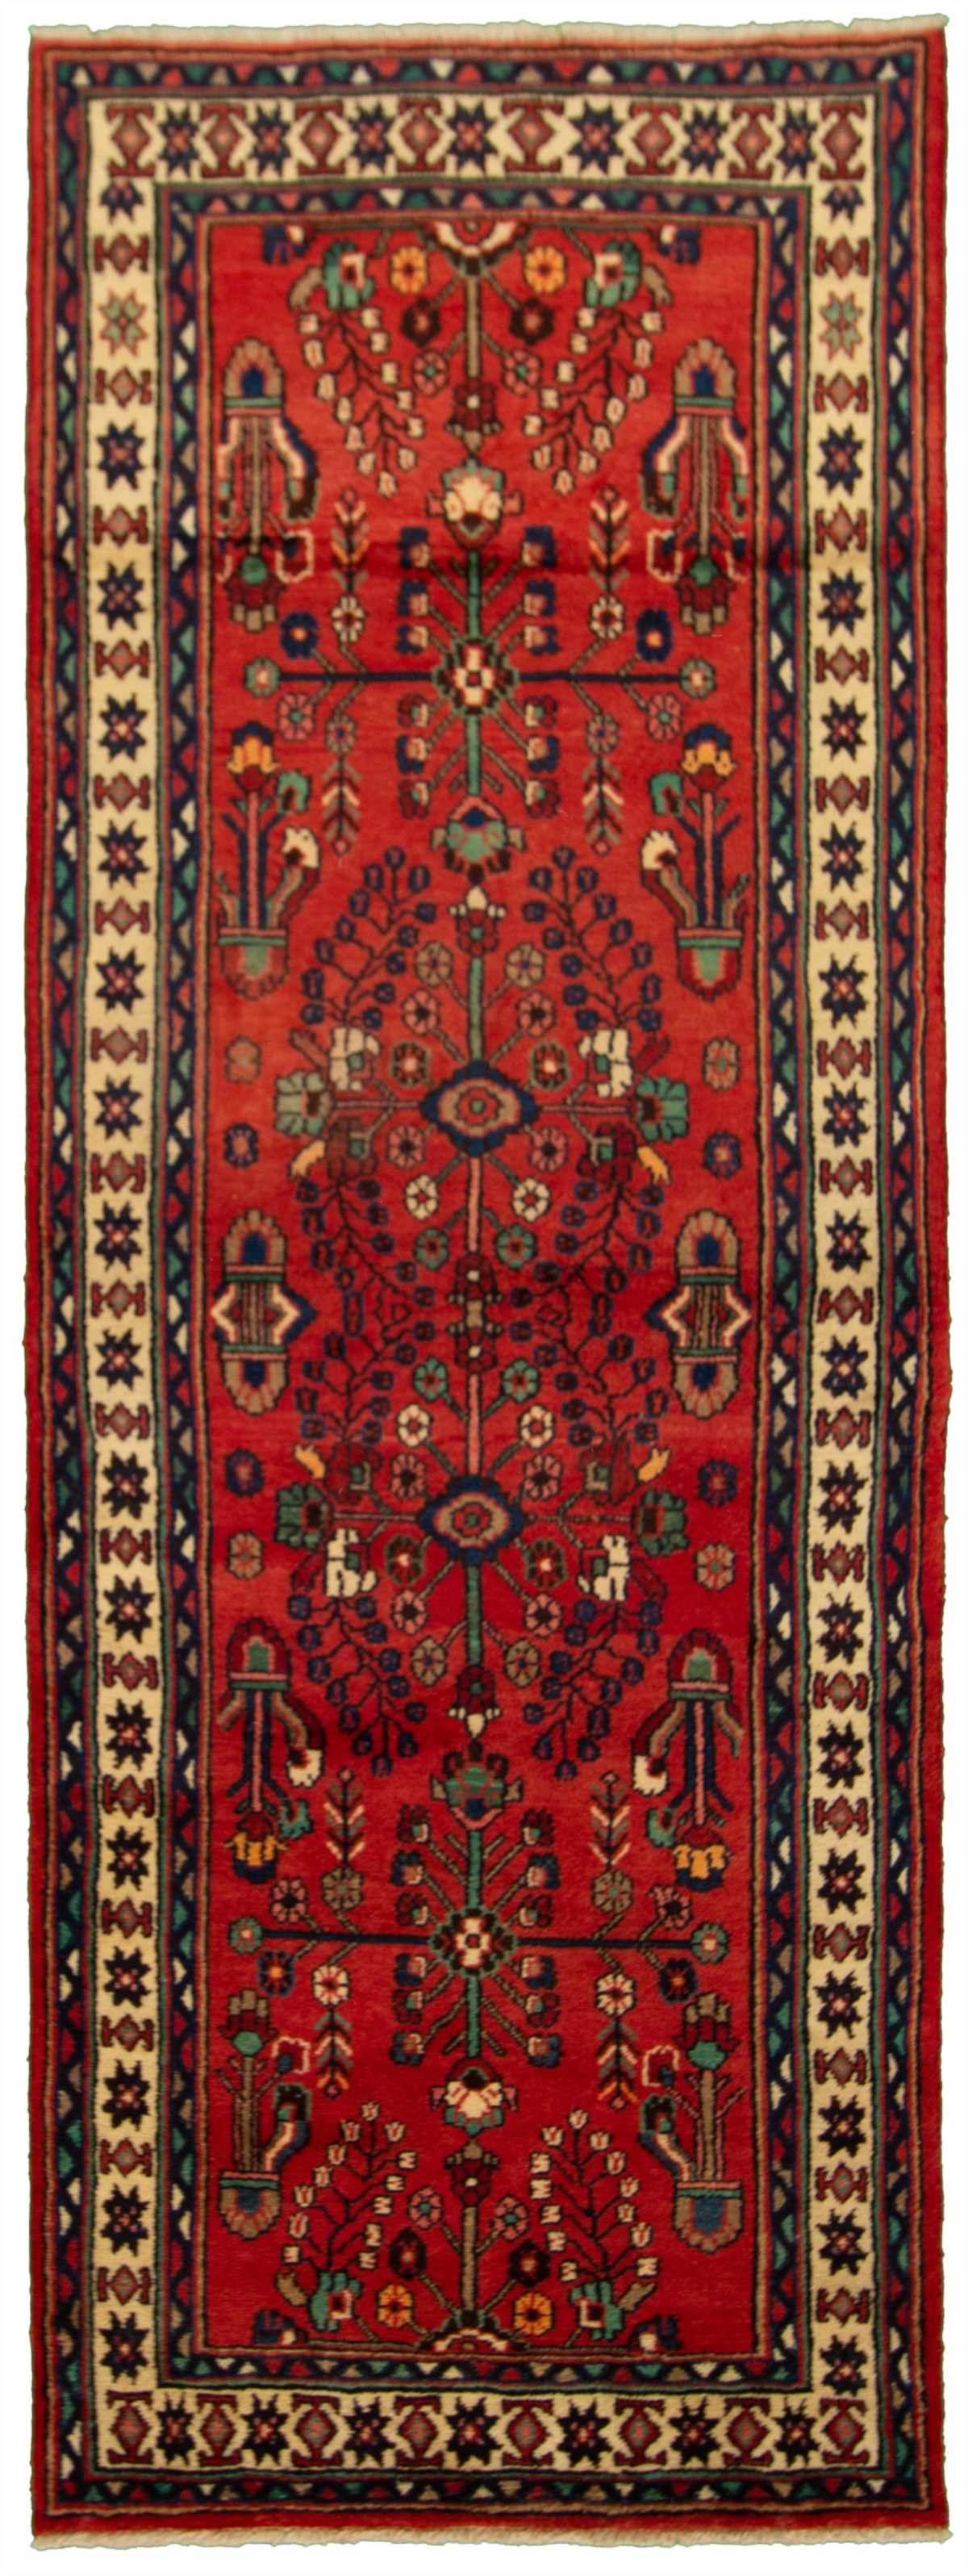 Hand-knotted Hamadan Red Wool Rug 3'8" x 10'2"  Size: 3'8" x 10'2"  